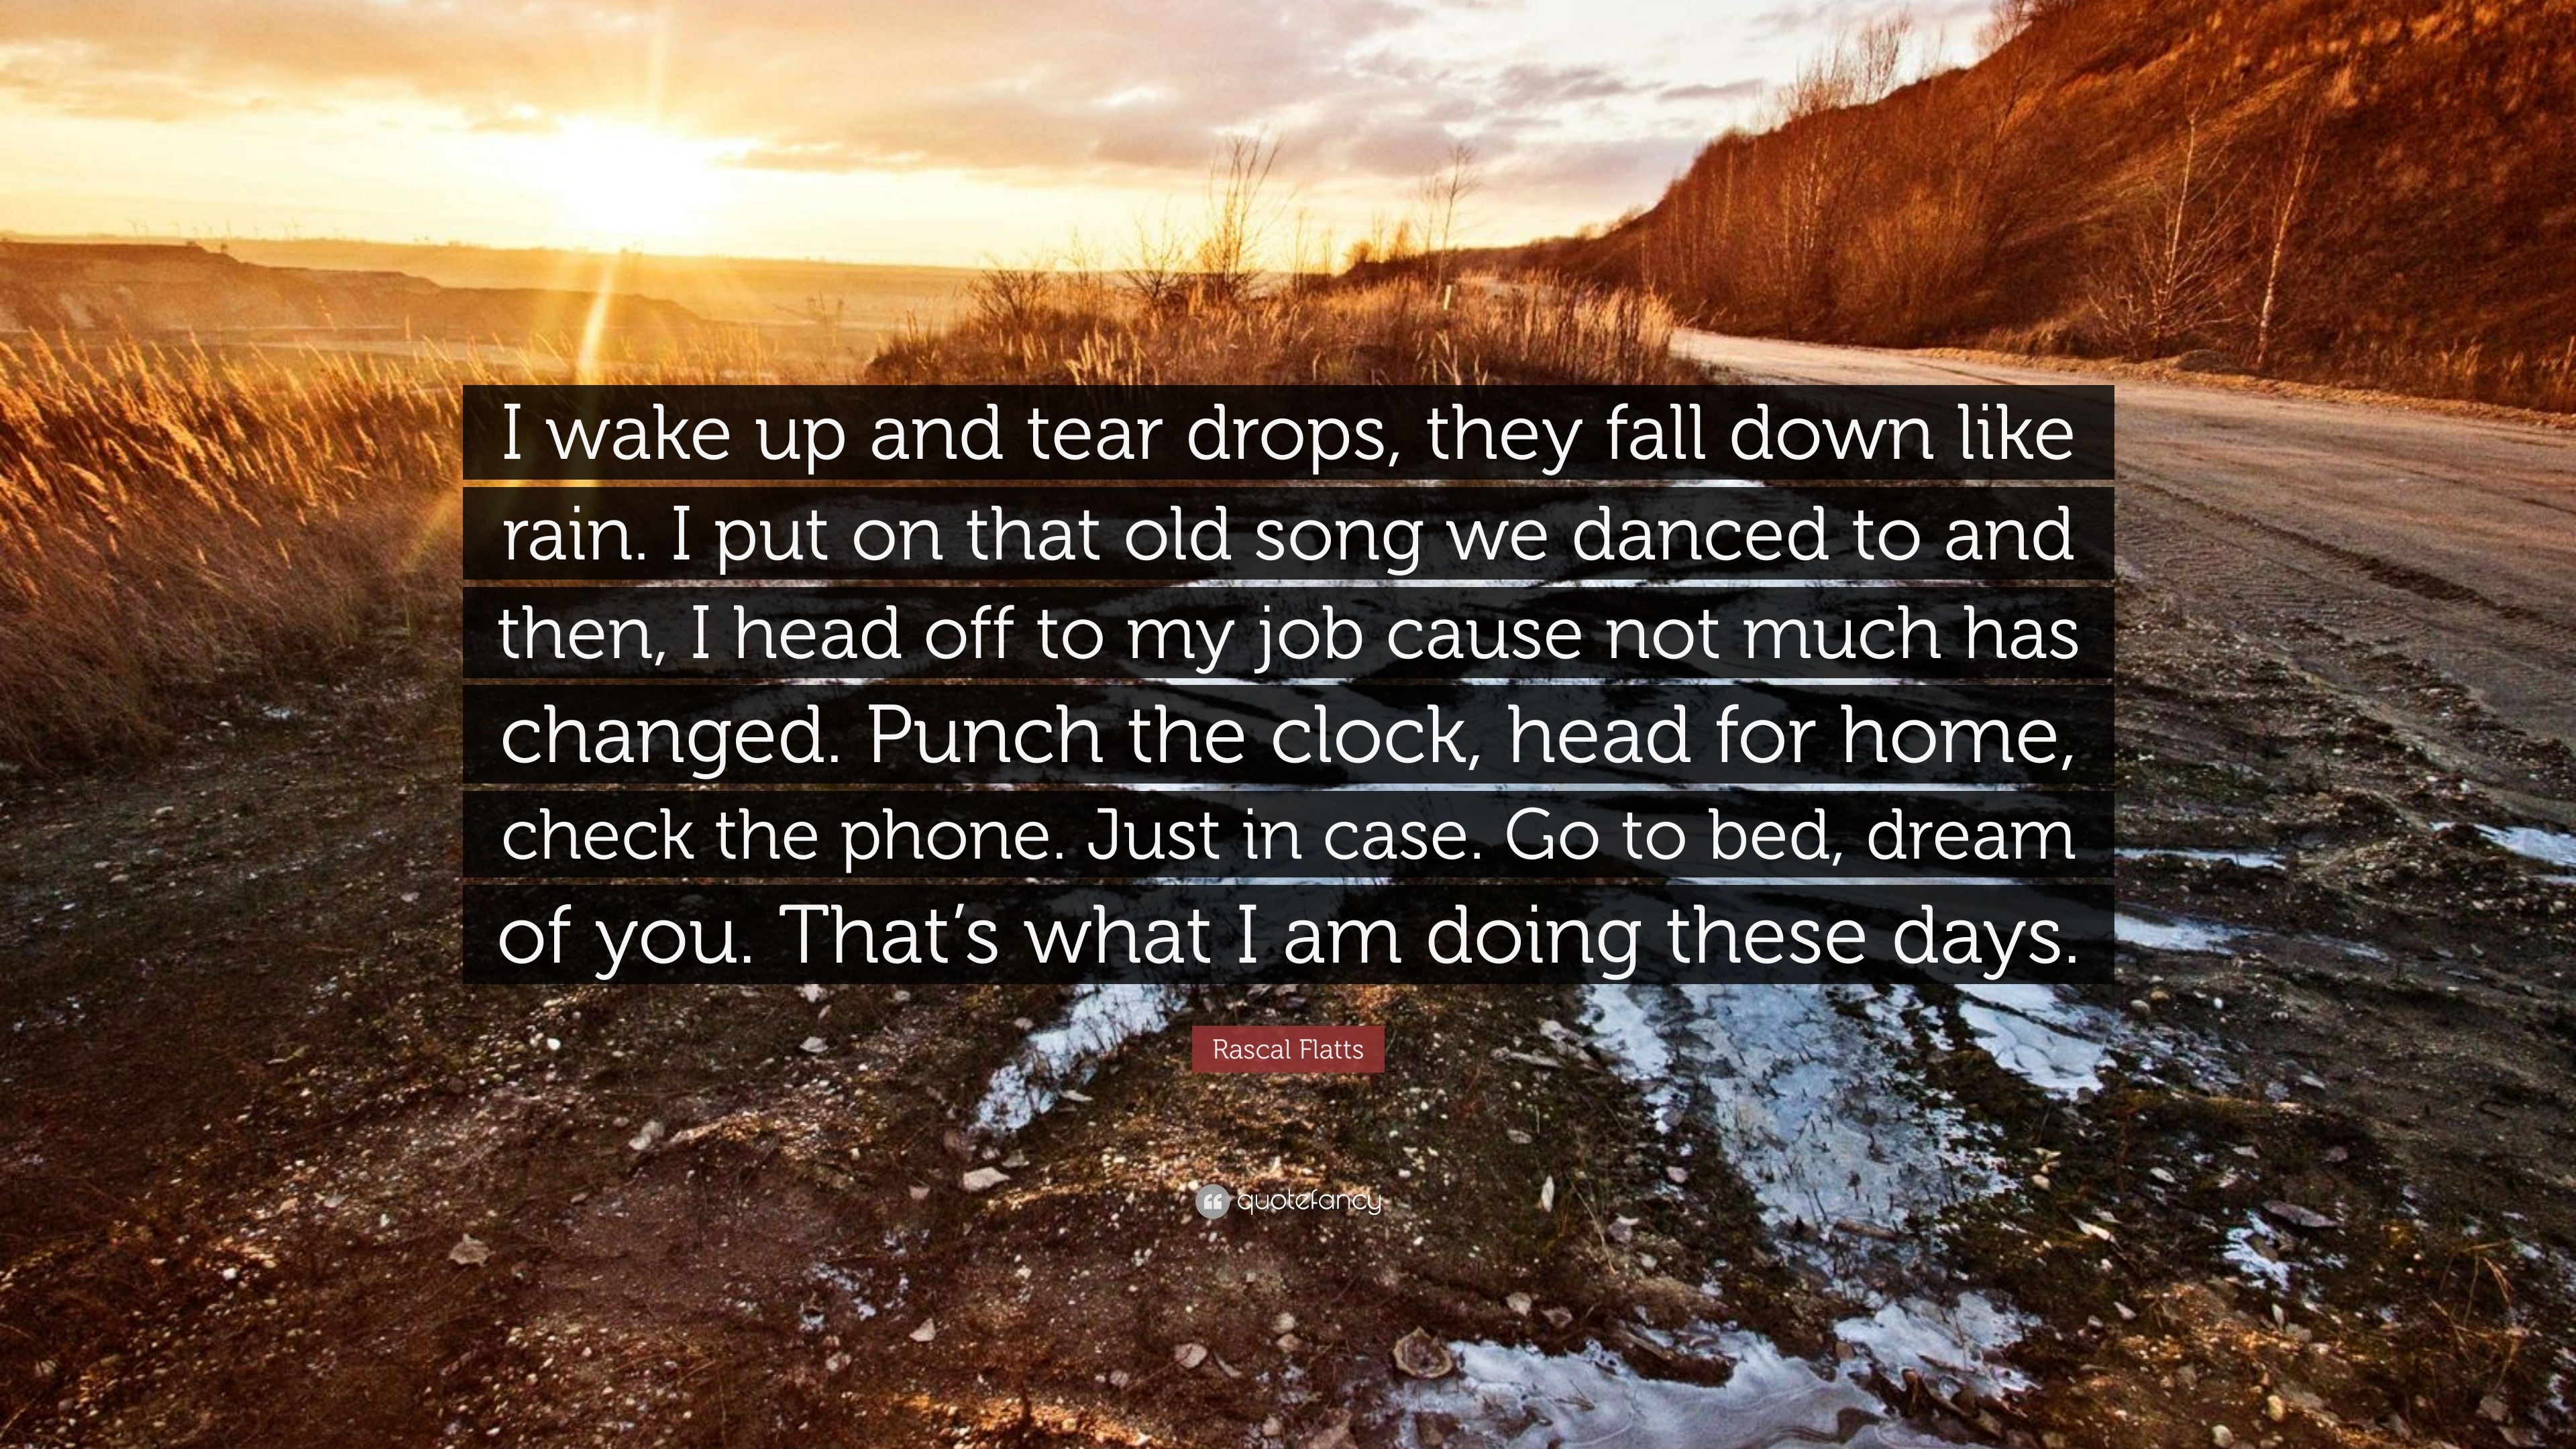 Rascal Flatts Quote “i Wake Up And Tear Drops They Fall Down Like Rain I Put On That Old Song